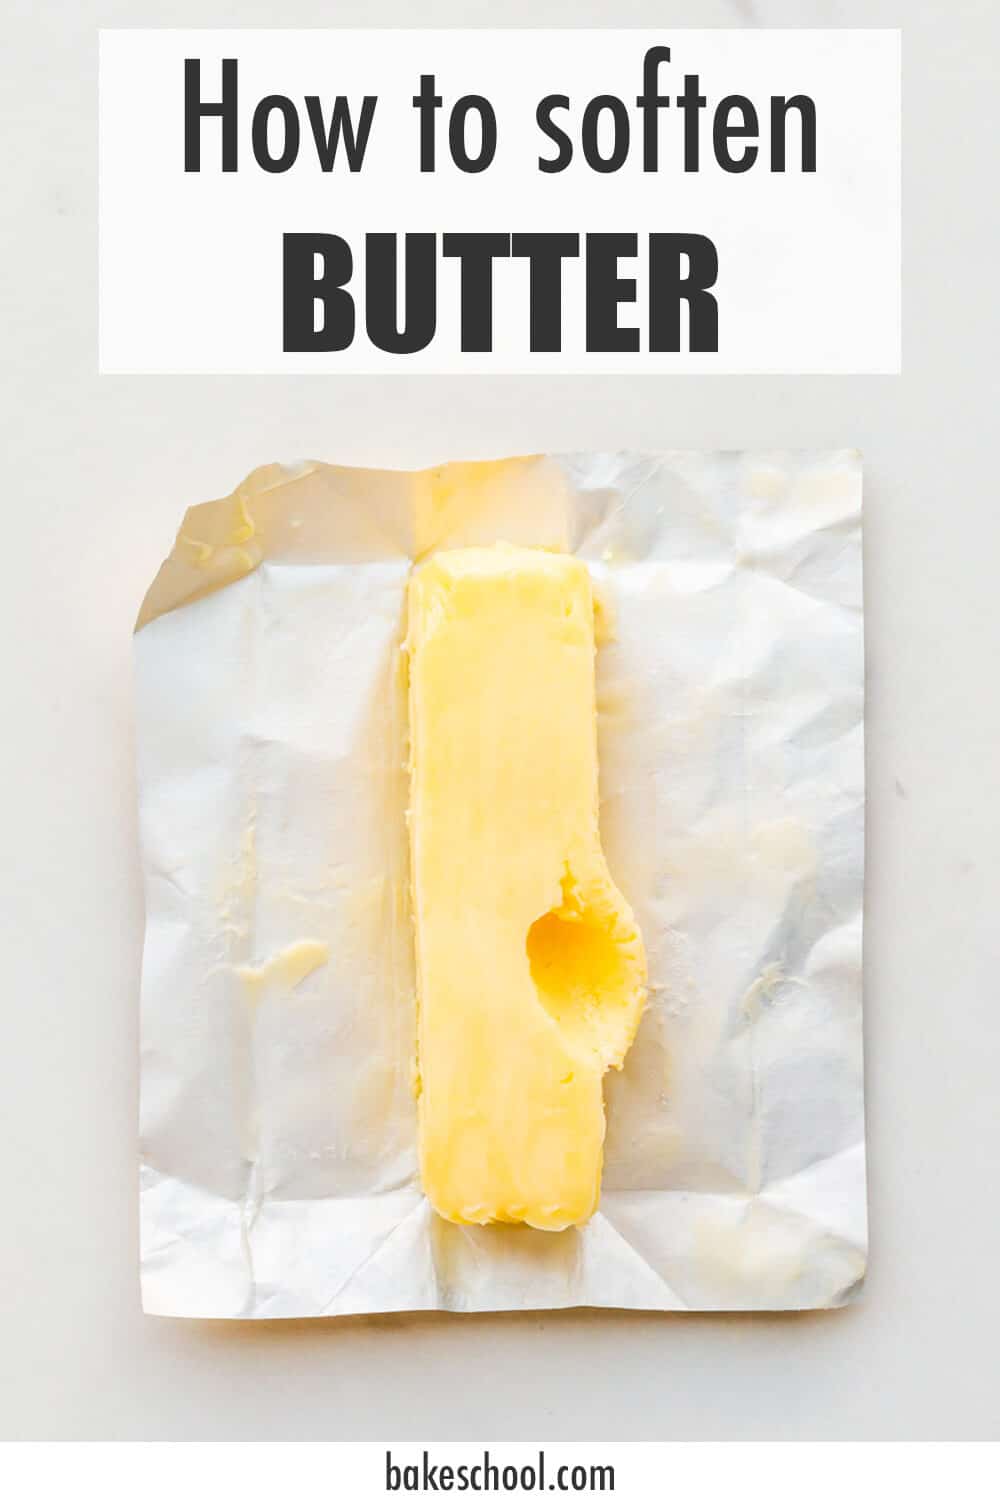 Softened butter with a deep thumbrint on the side to show the pliable texture that it has, which is perfect for baking cookies and cakes.